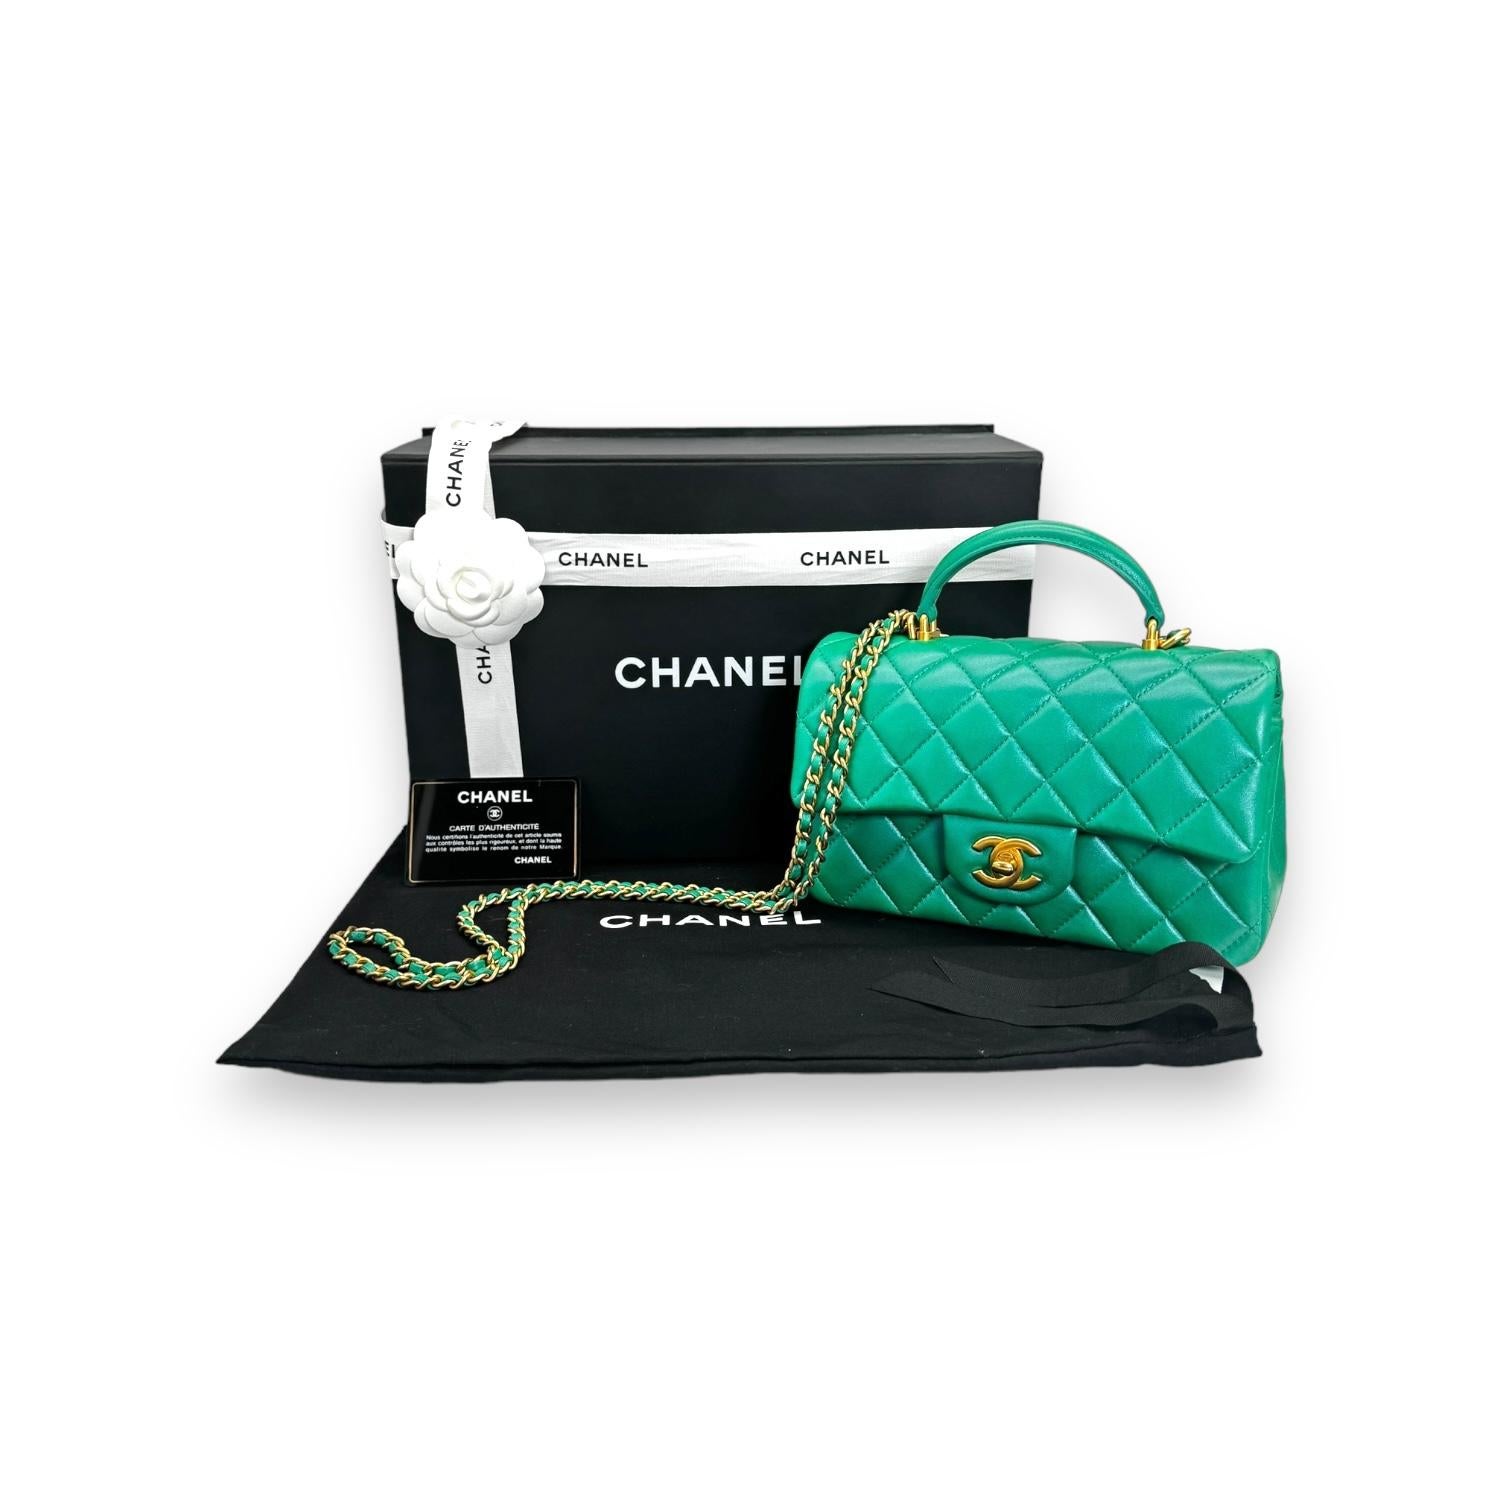 This stunning Chanel mini flap top handle bag is a timeless and chic accessory that is perfect for any occasion. The bag is crafted from luxurious lambskin leather in a beautiful iridescent green color that shimmers in the light. The bag features